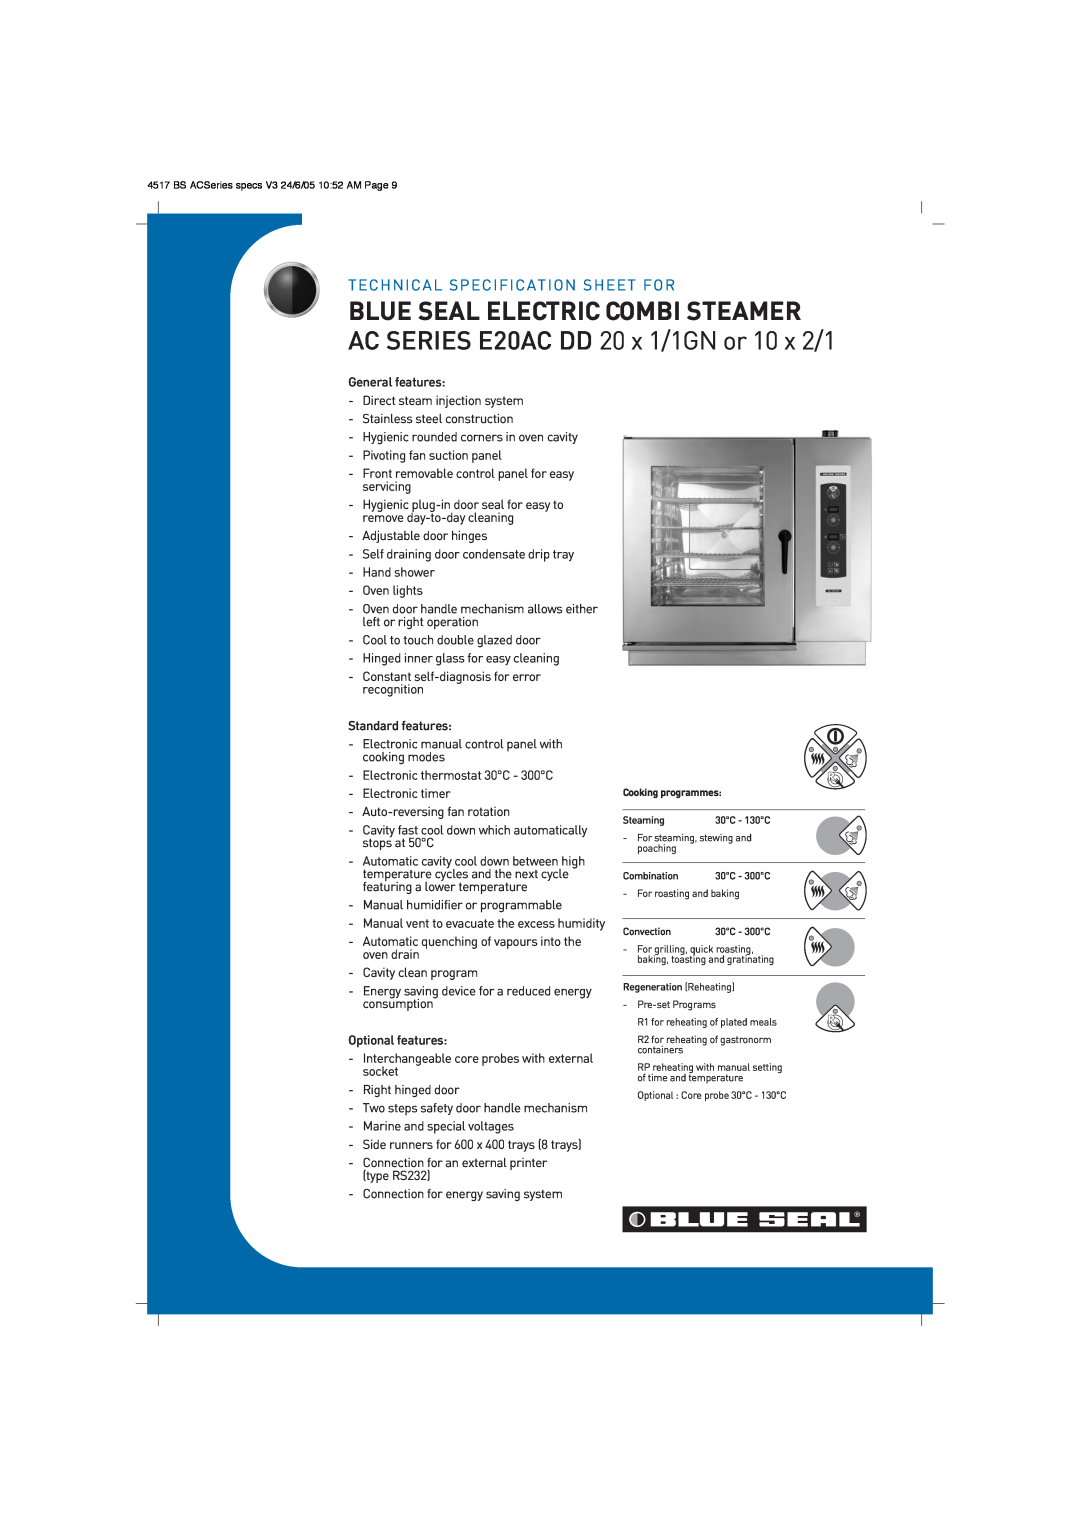 Moffat technical specifications Blue Seal Electric Combi Steamer, AC SERIES E20AC DD 20 x 1/1GN or 10 x 2/1 